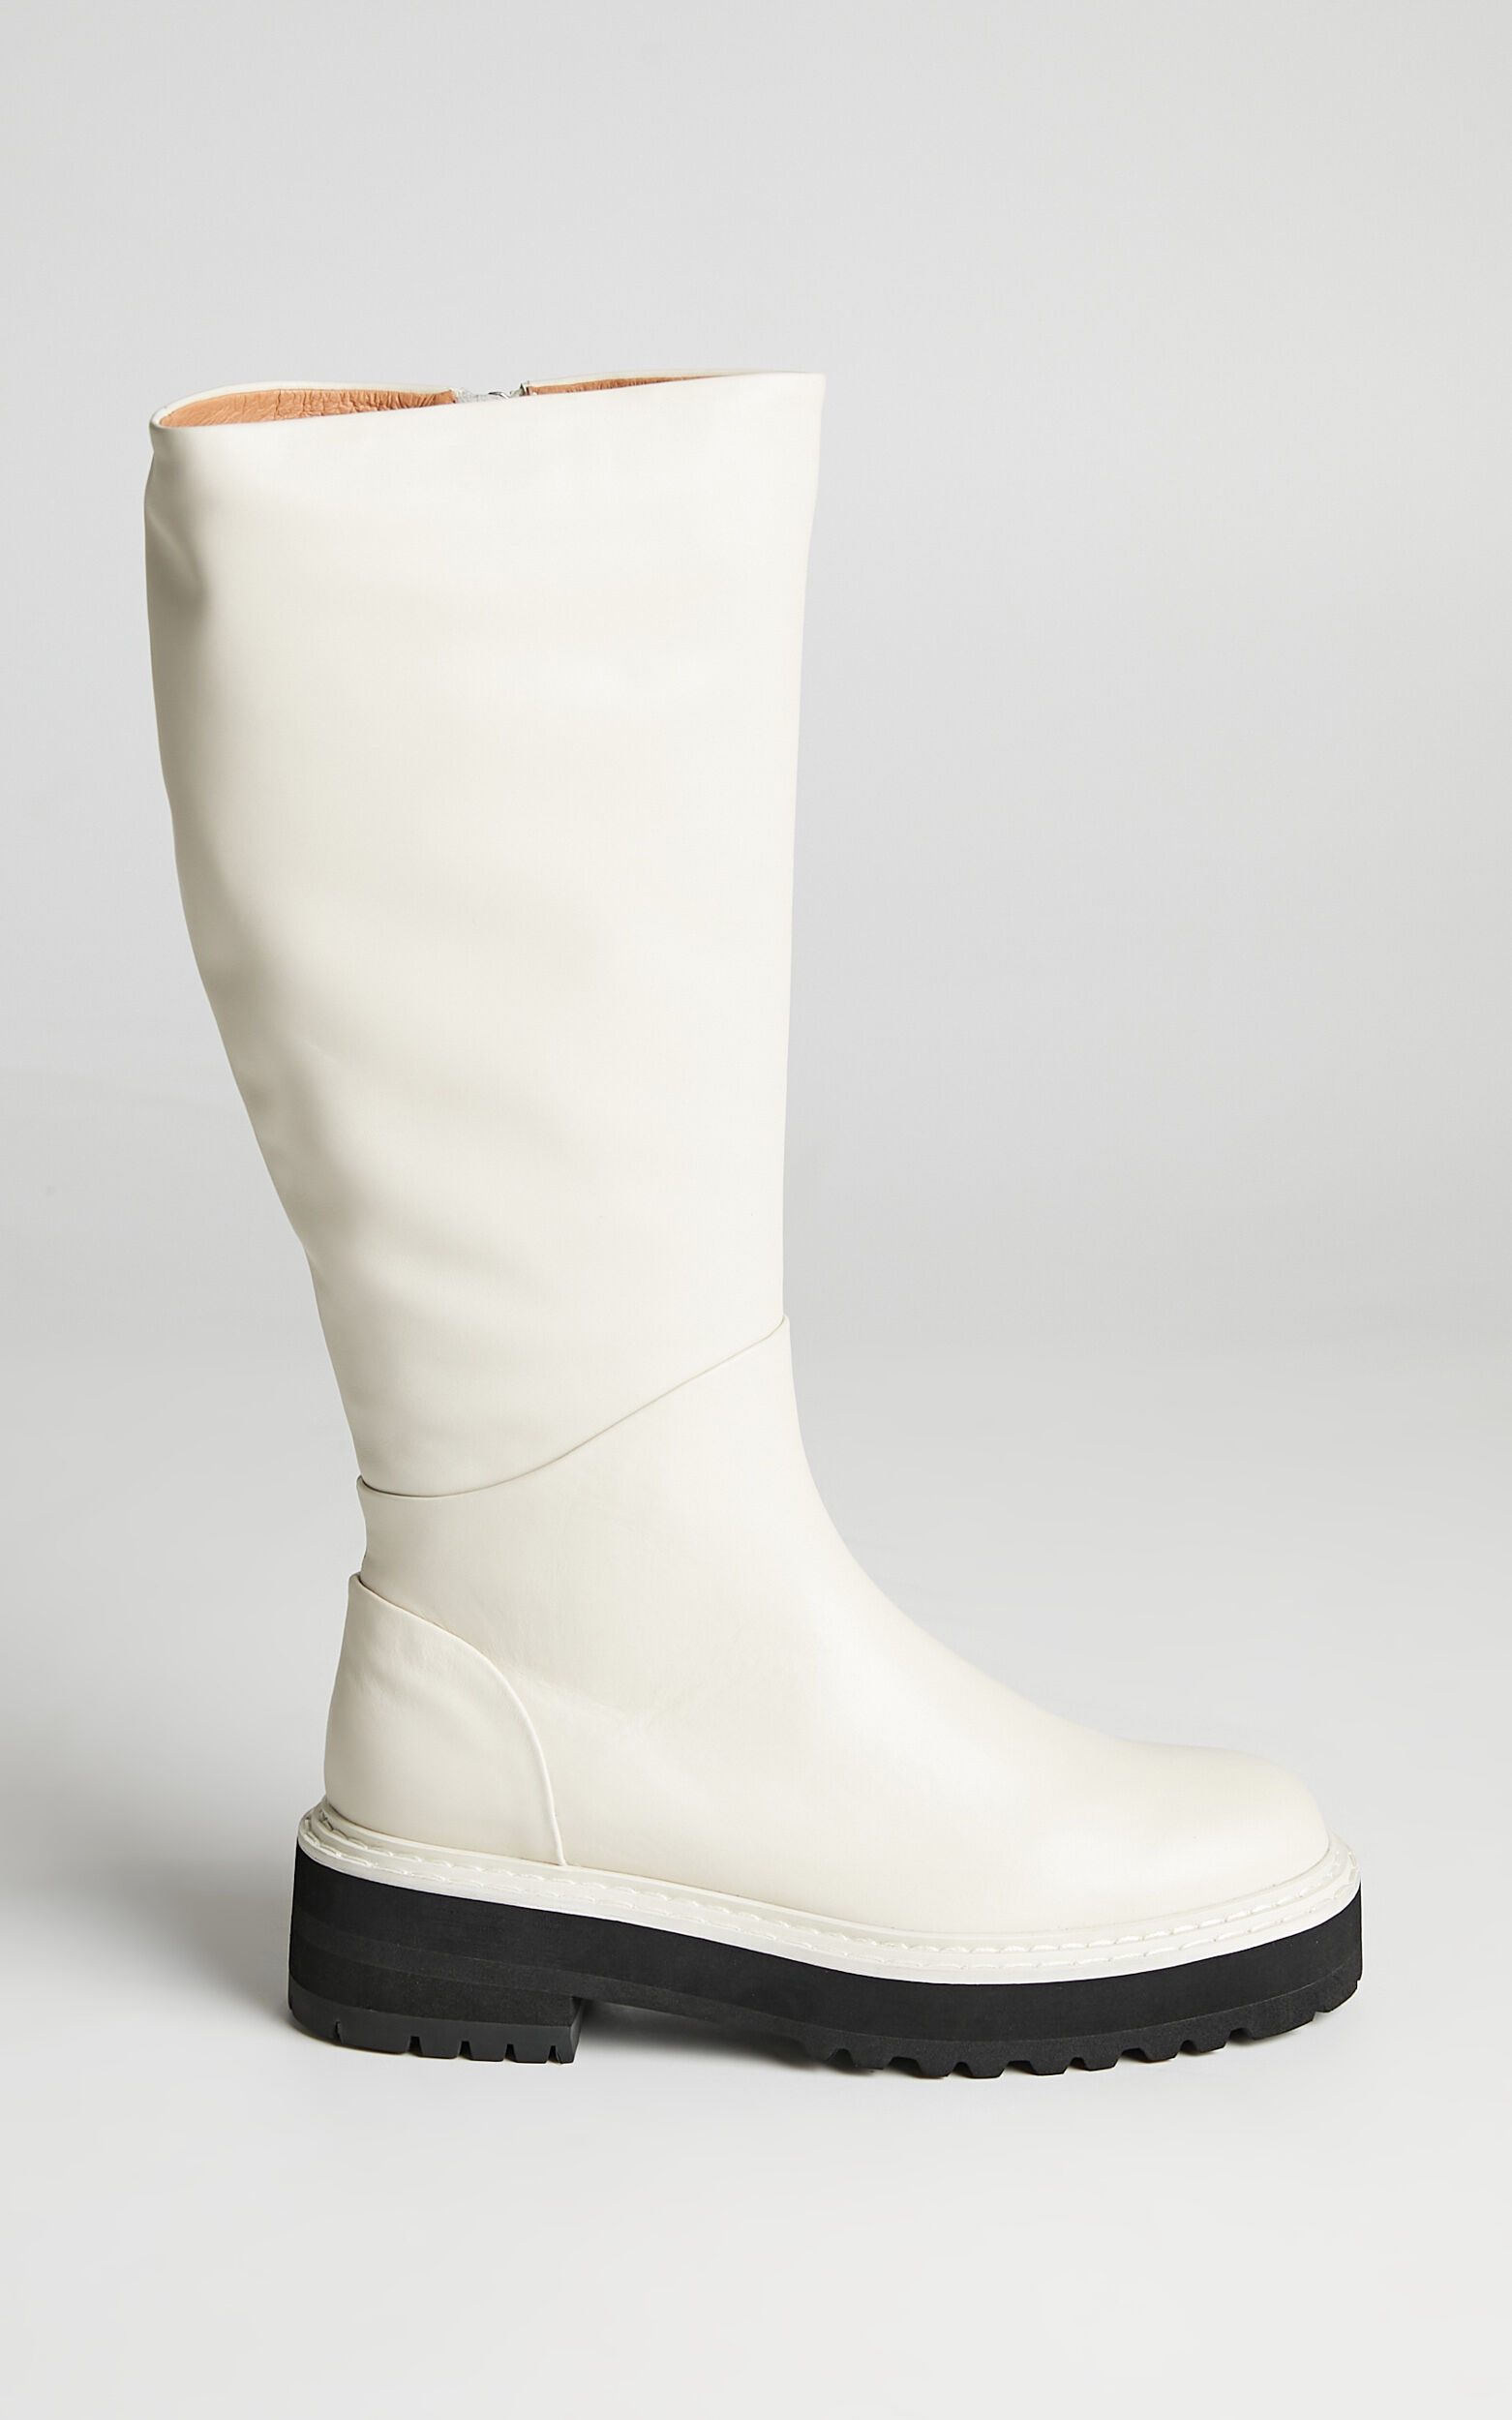 Alias Mae - Rohan Boots in Bone Leather - 10.5, WHT2, super-hi-res image number null